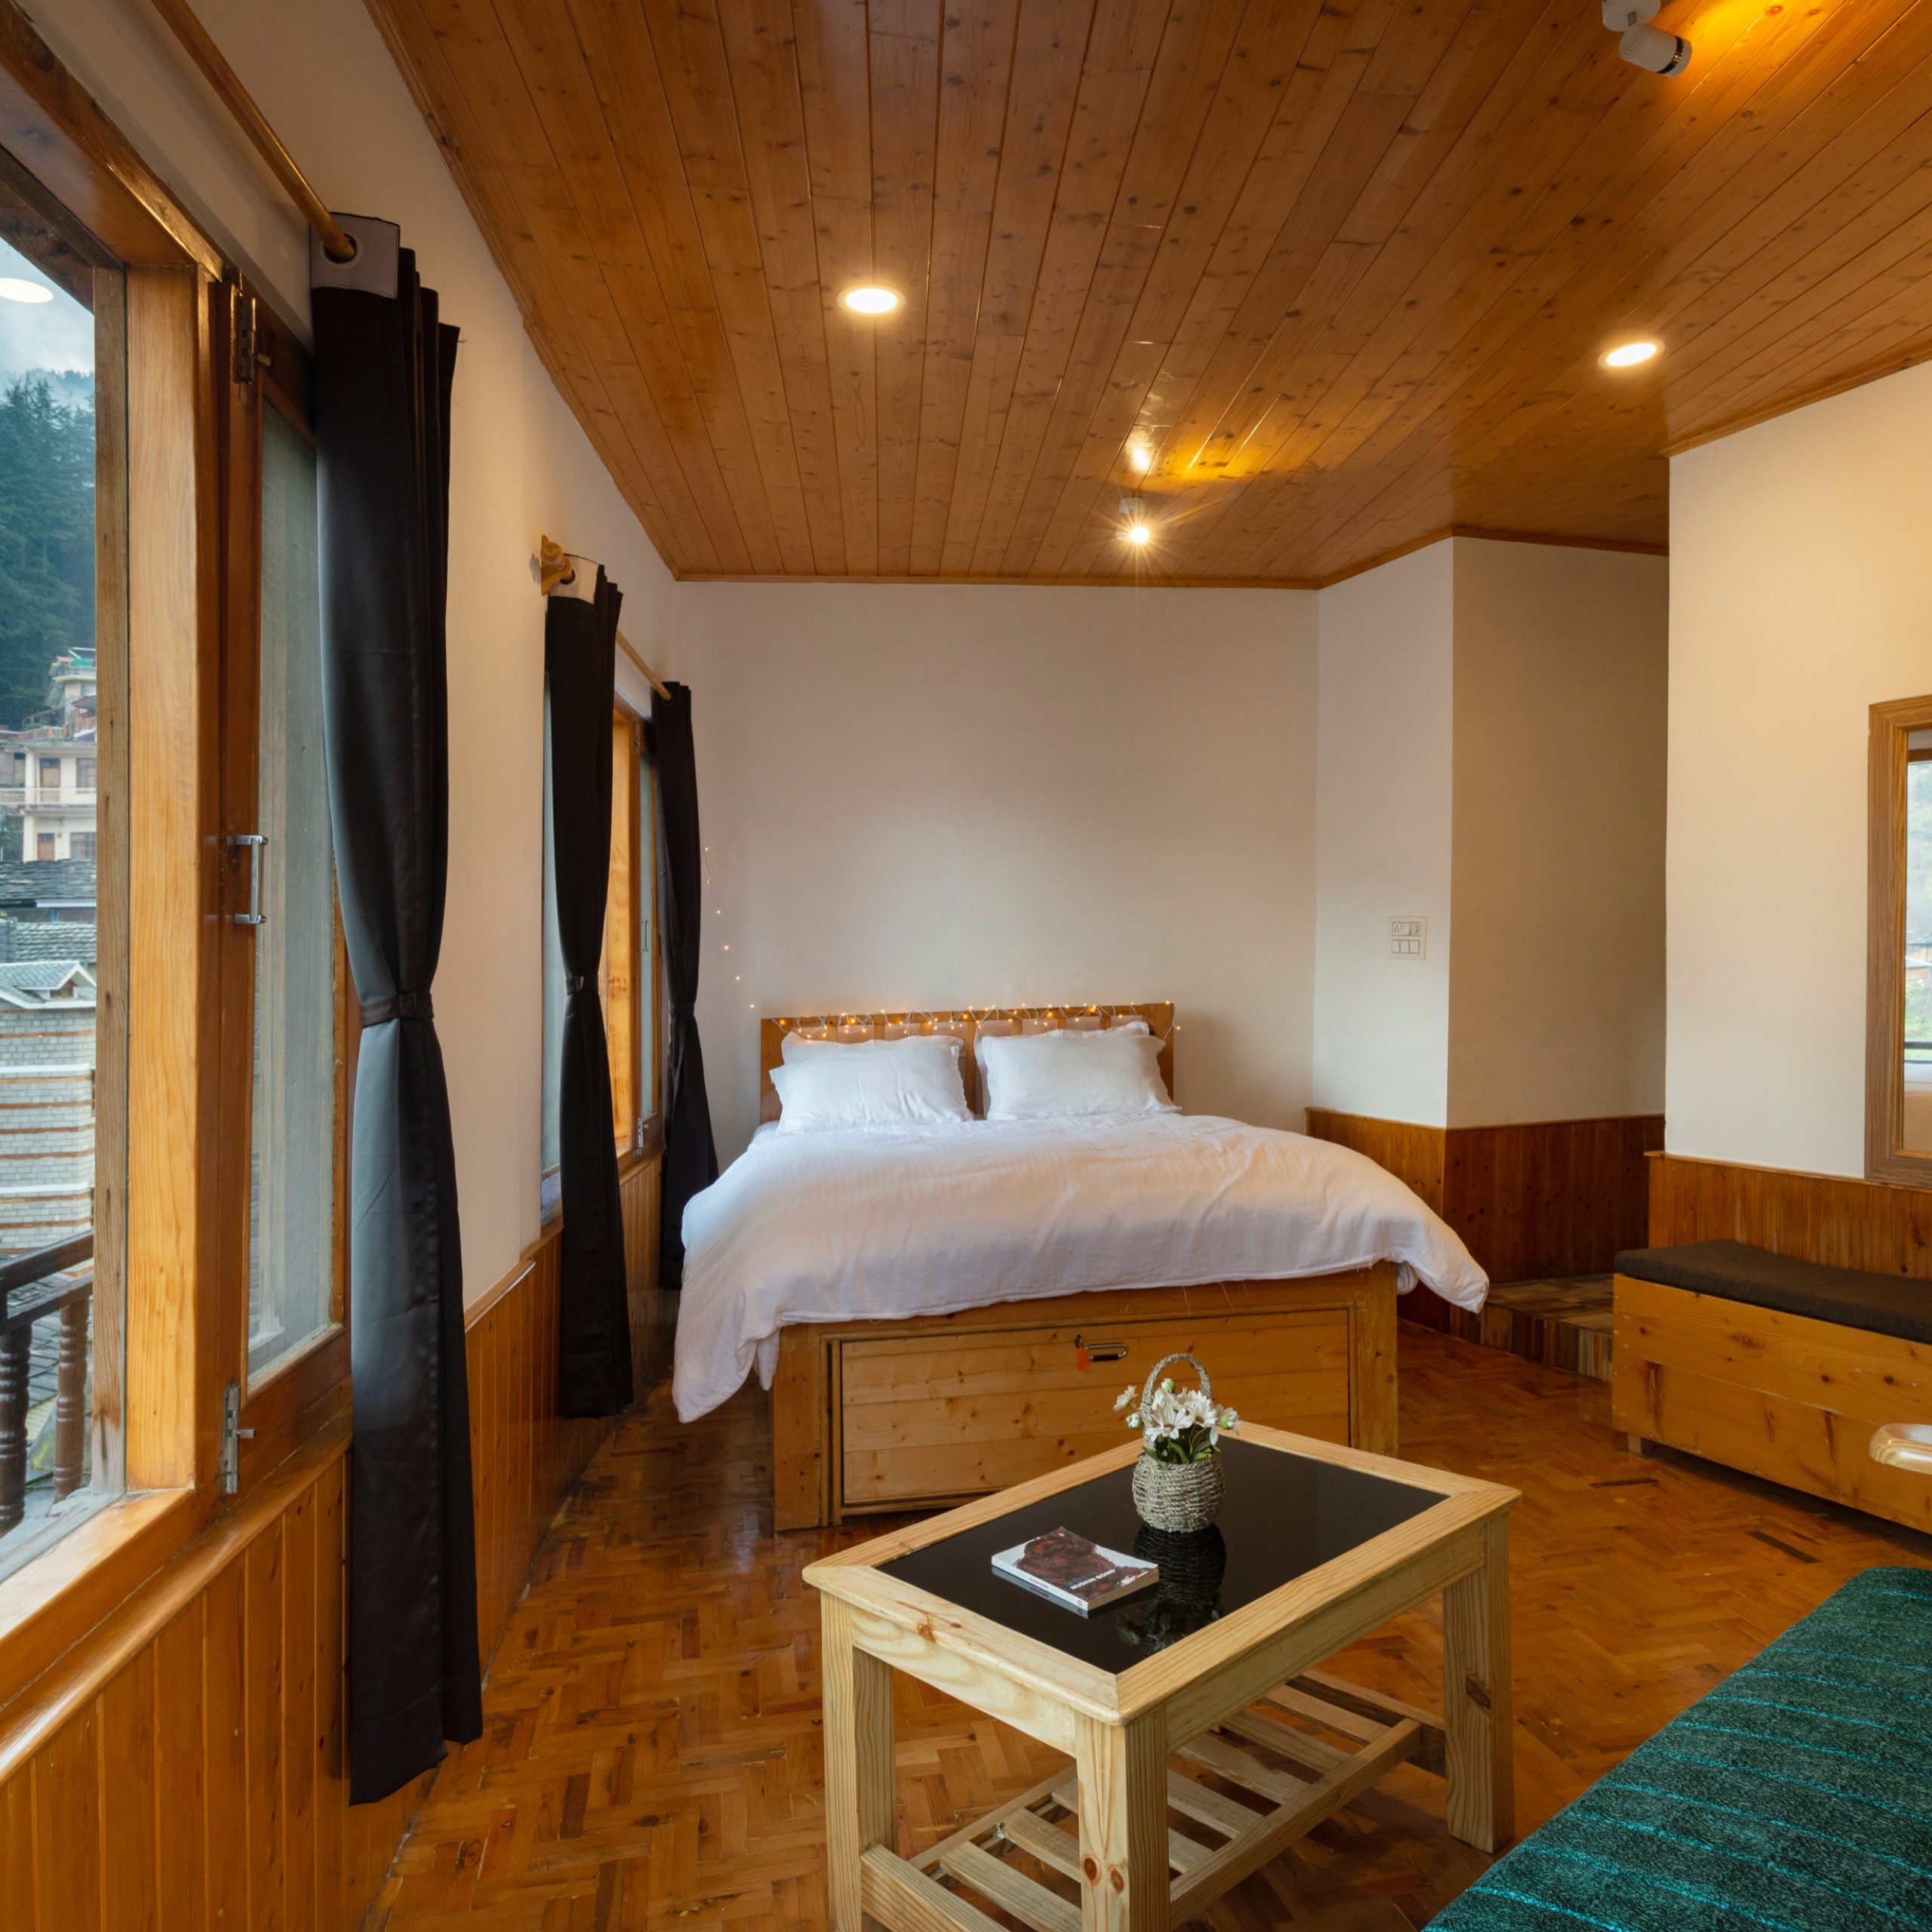 Naggar : Deluxe Private Room